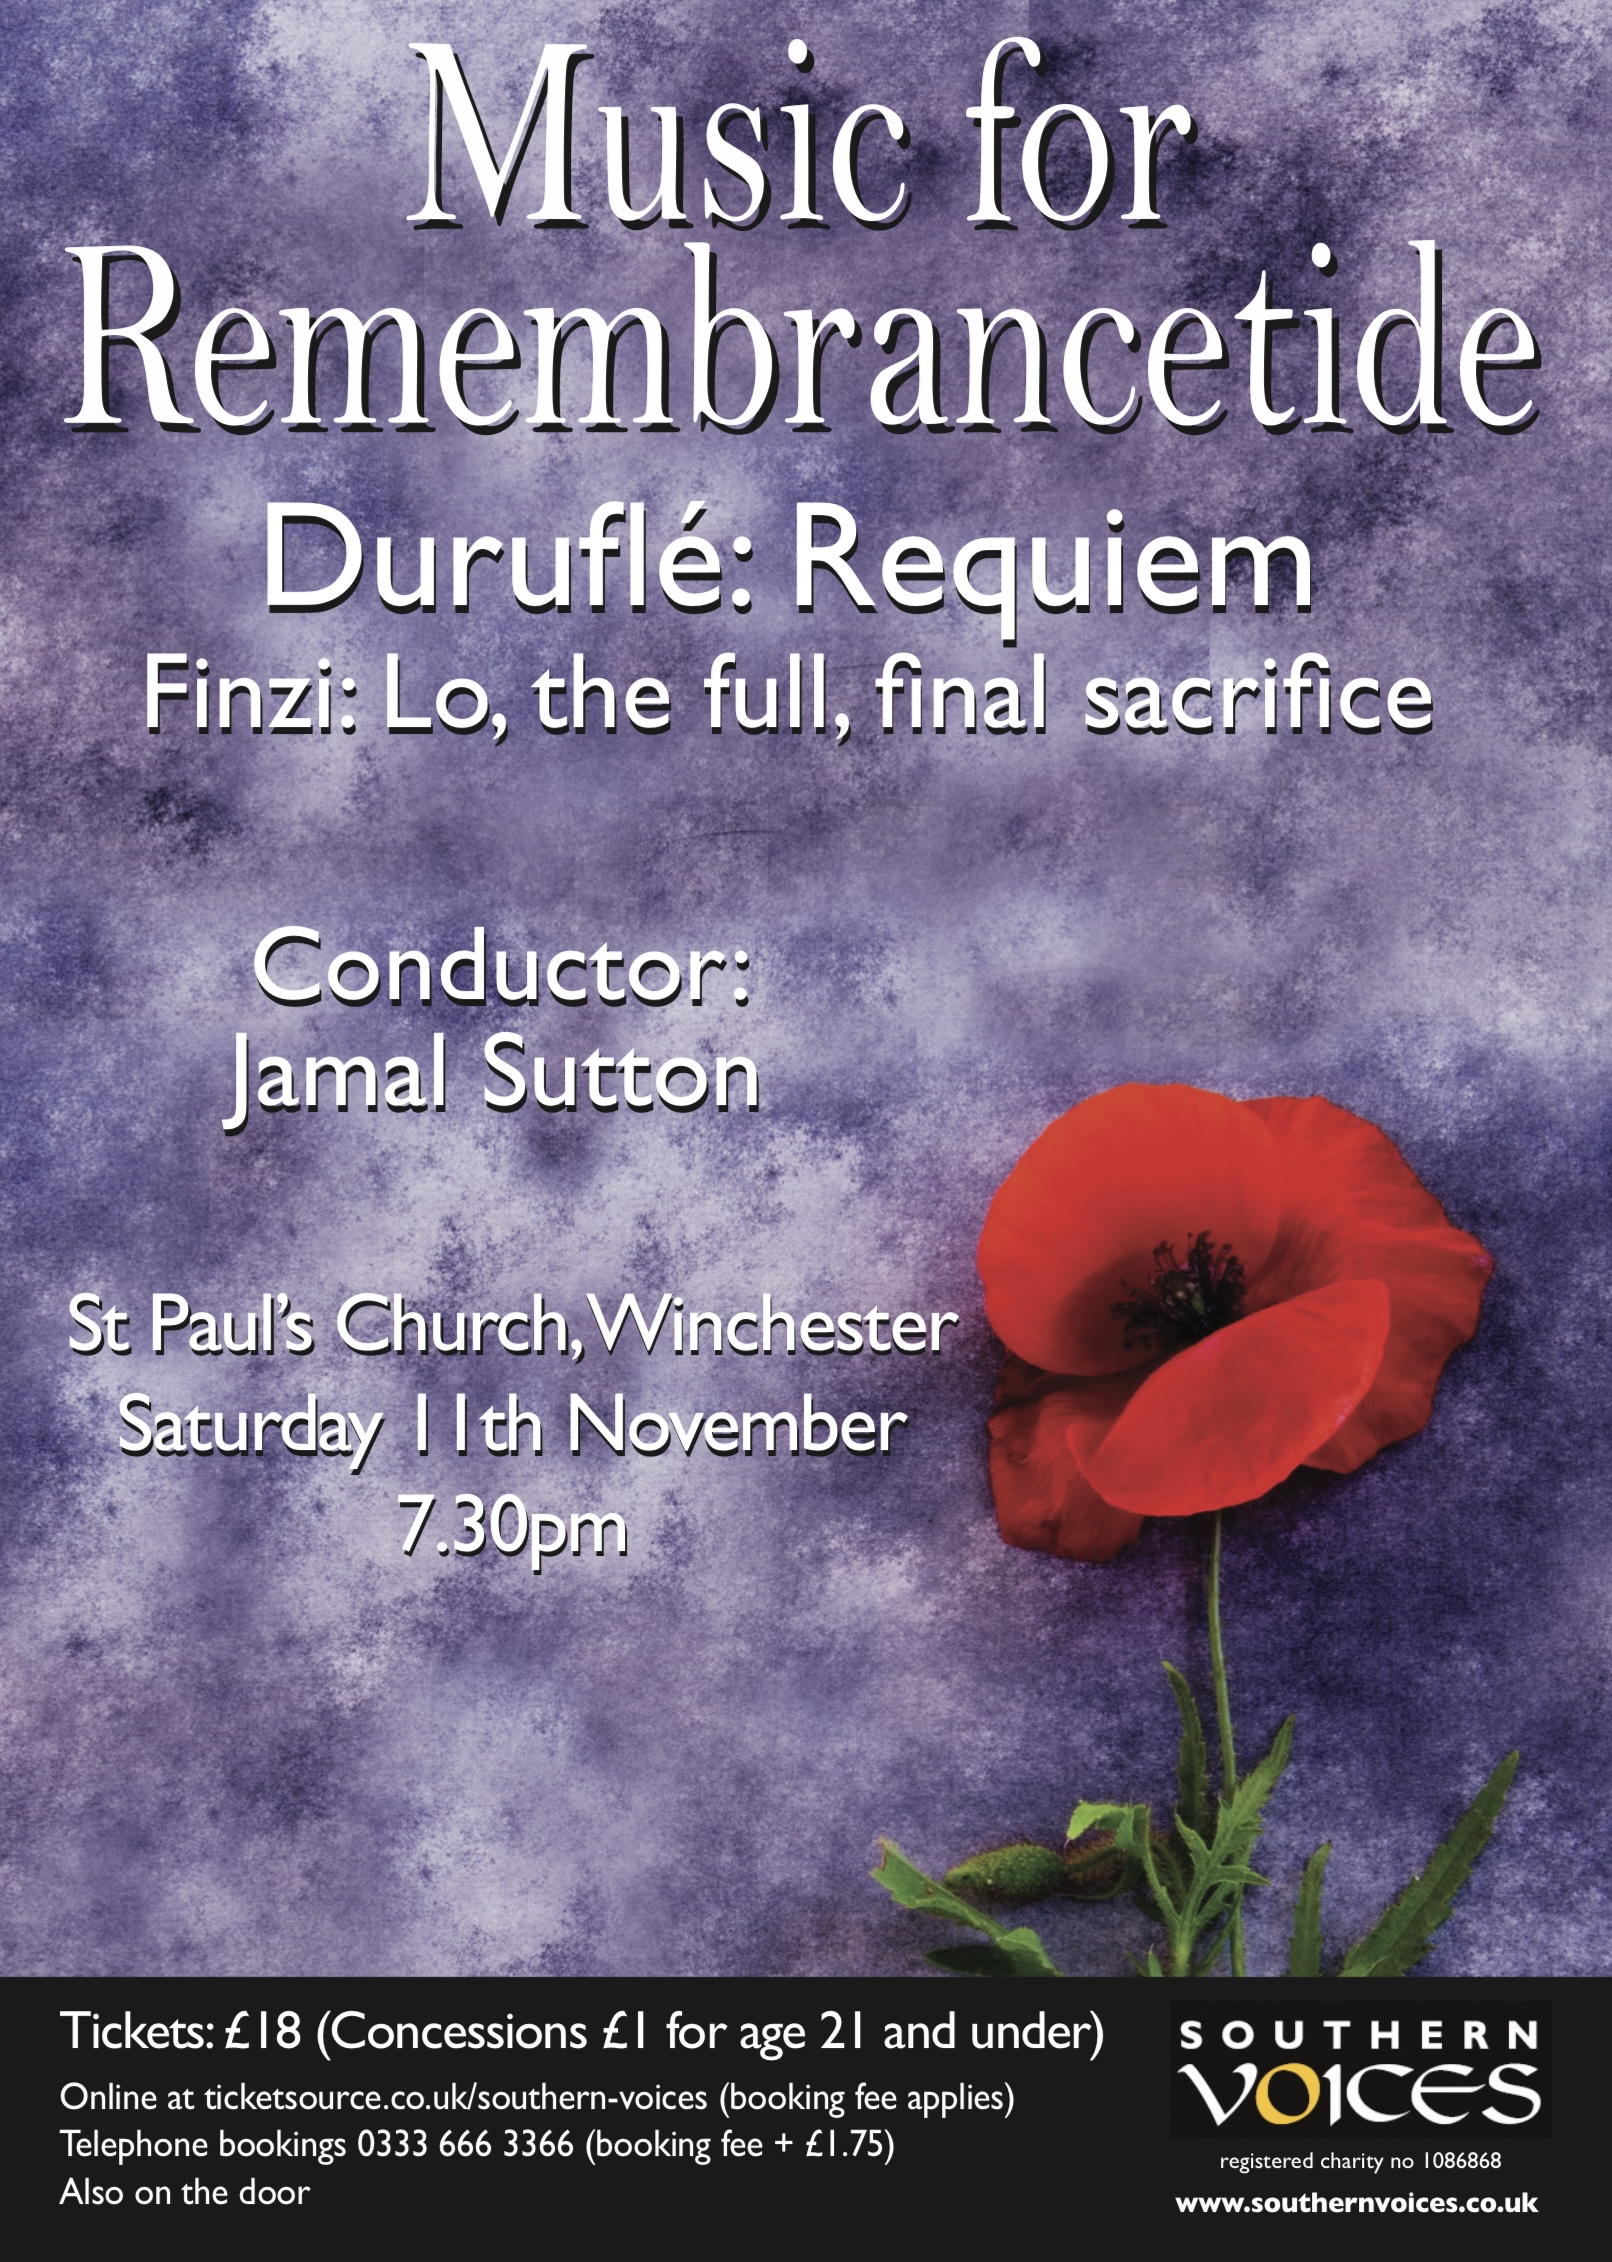 Southern Voices: Music for Remembrancetide